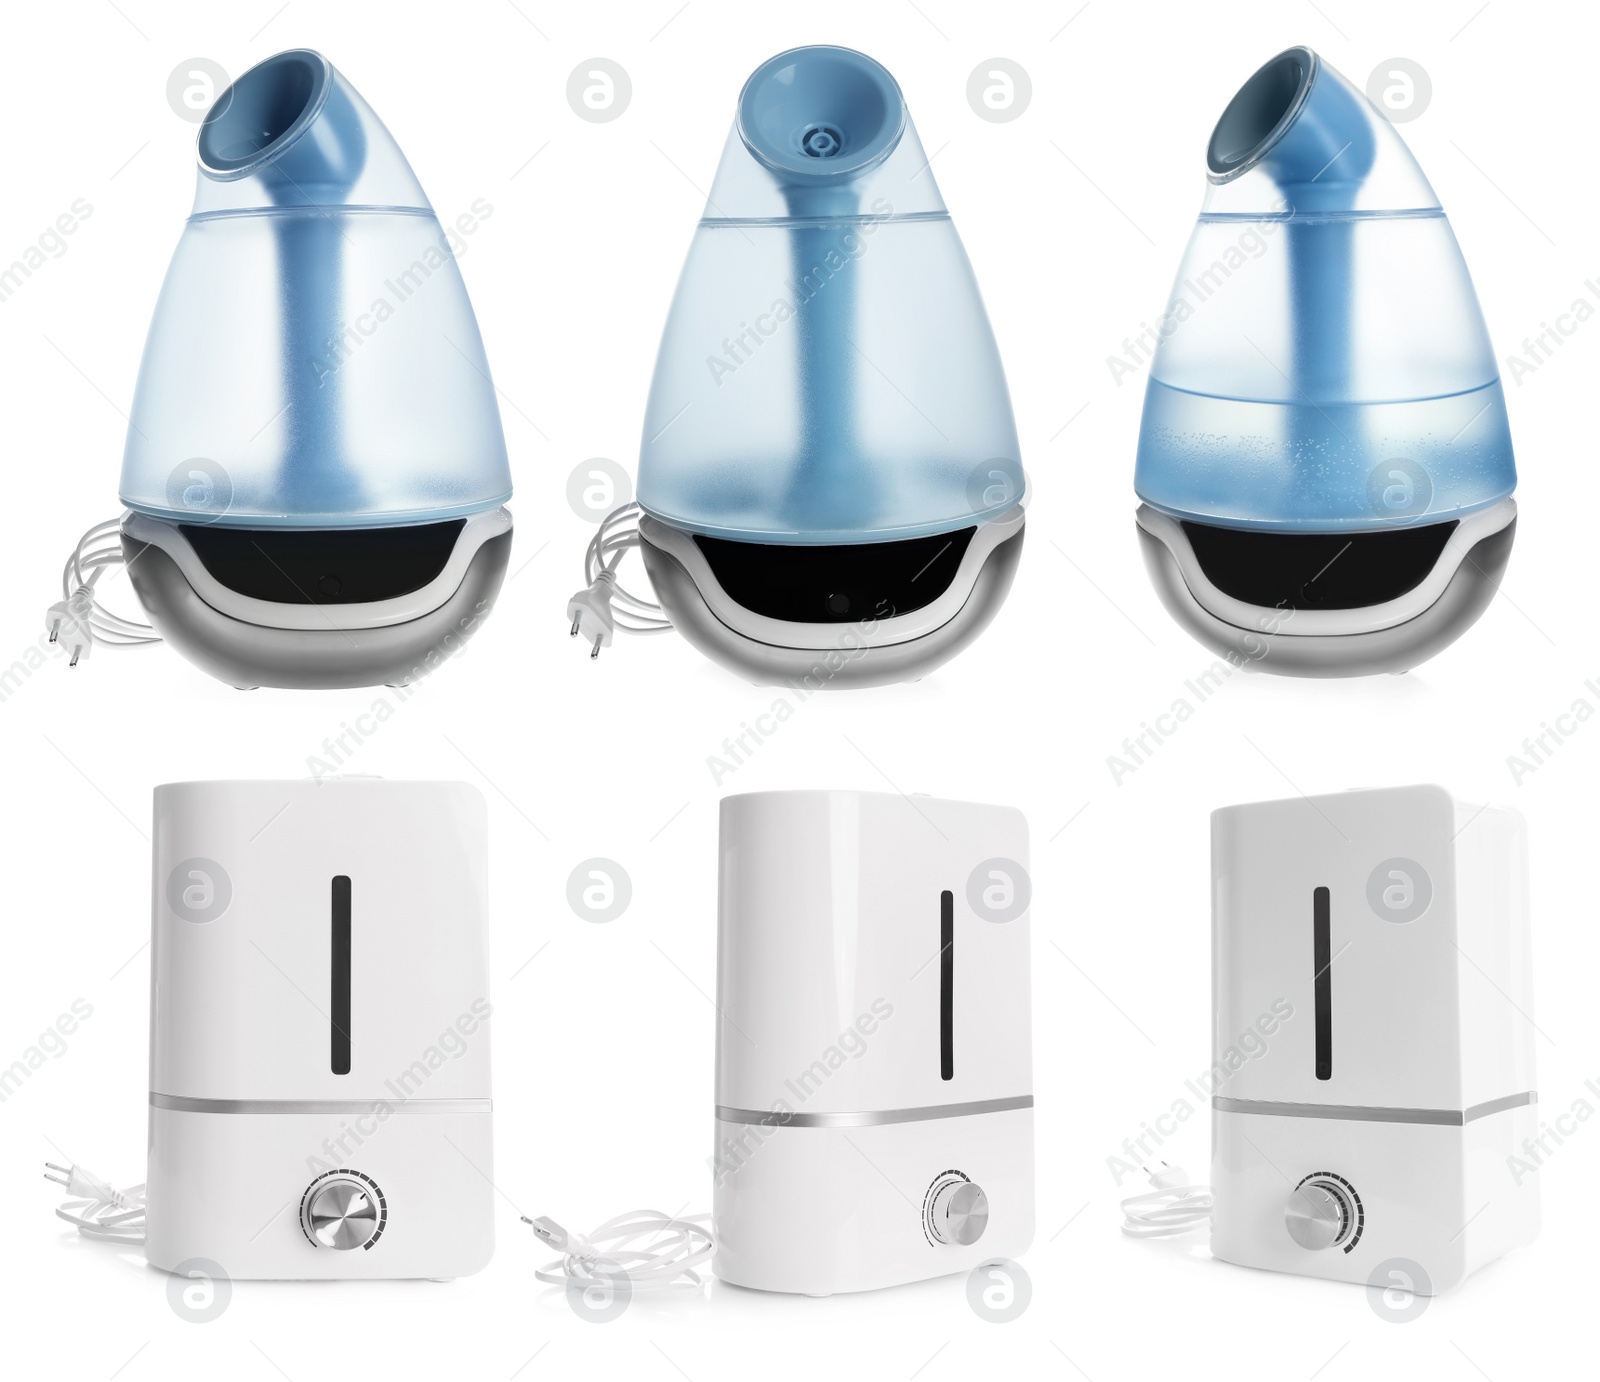 Image of Collage with two modern air humidifiers on white background, view from different sides